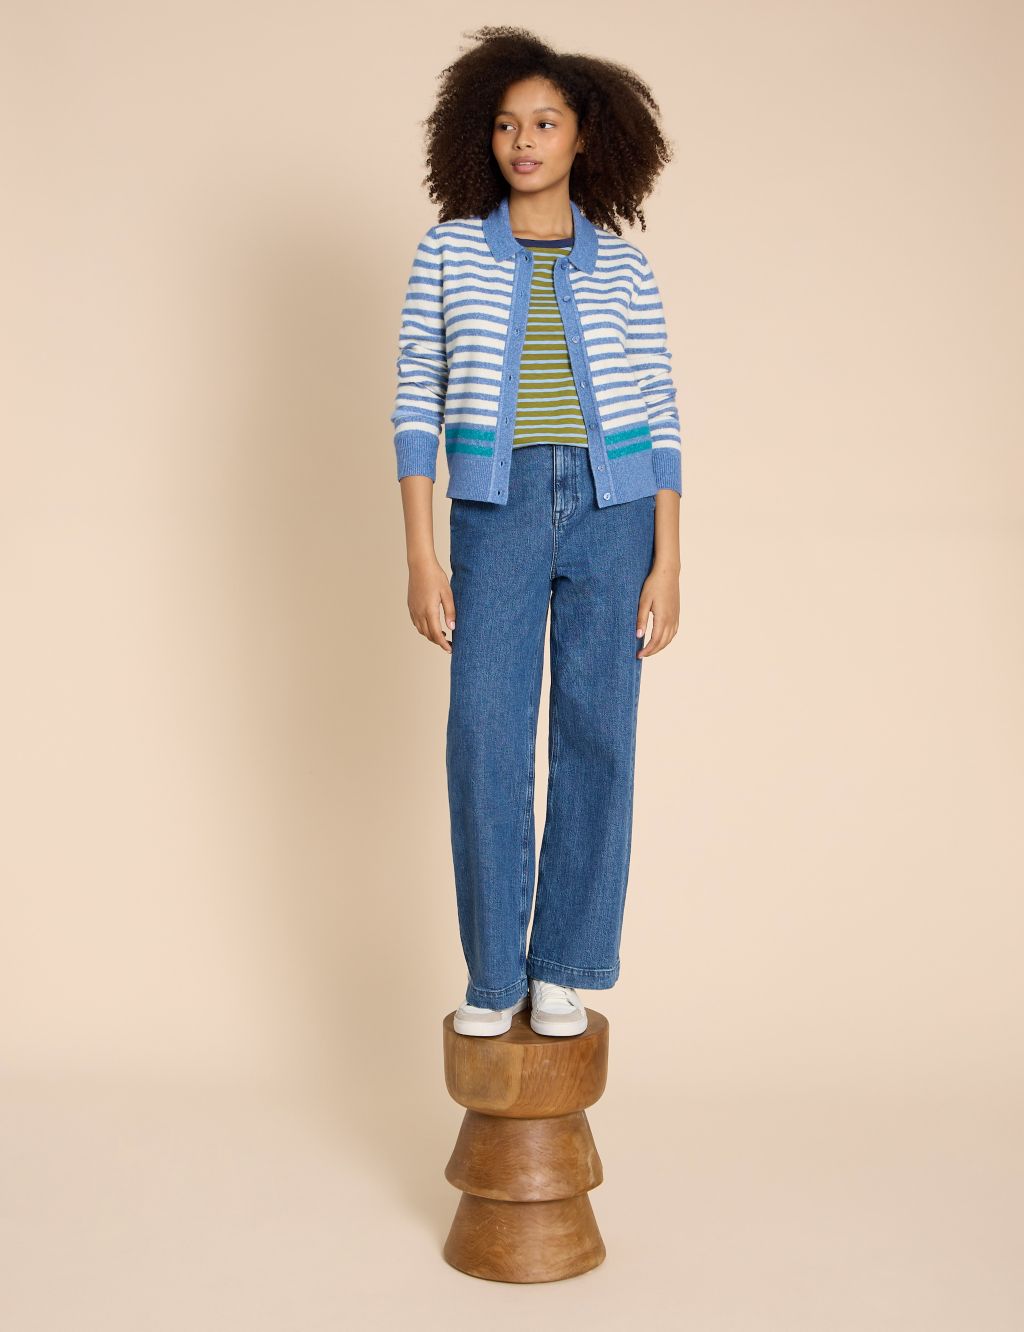 Striped Collared Button Front Cardigan image 3